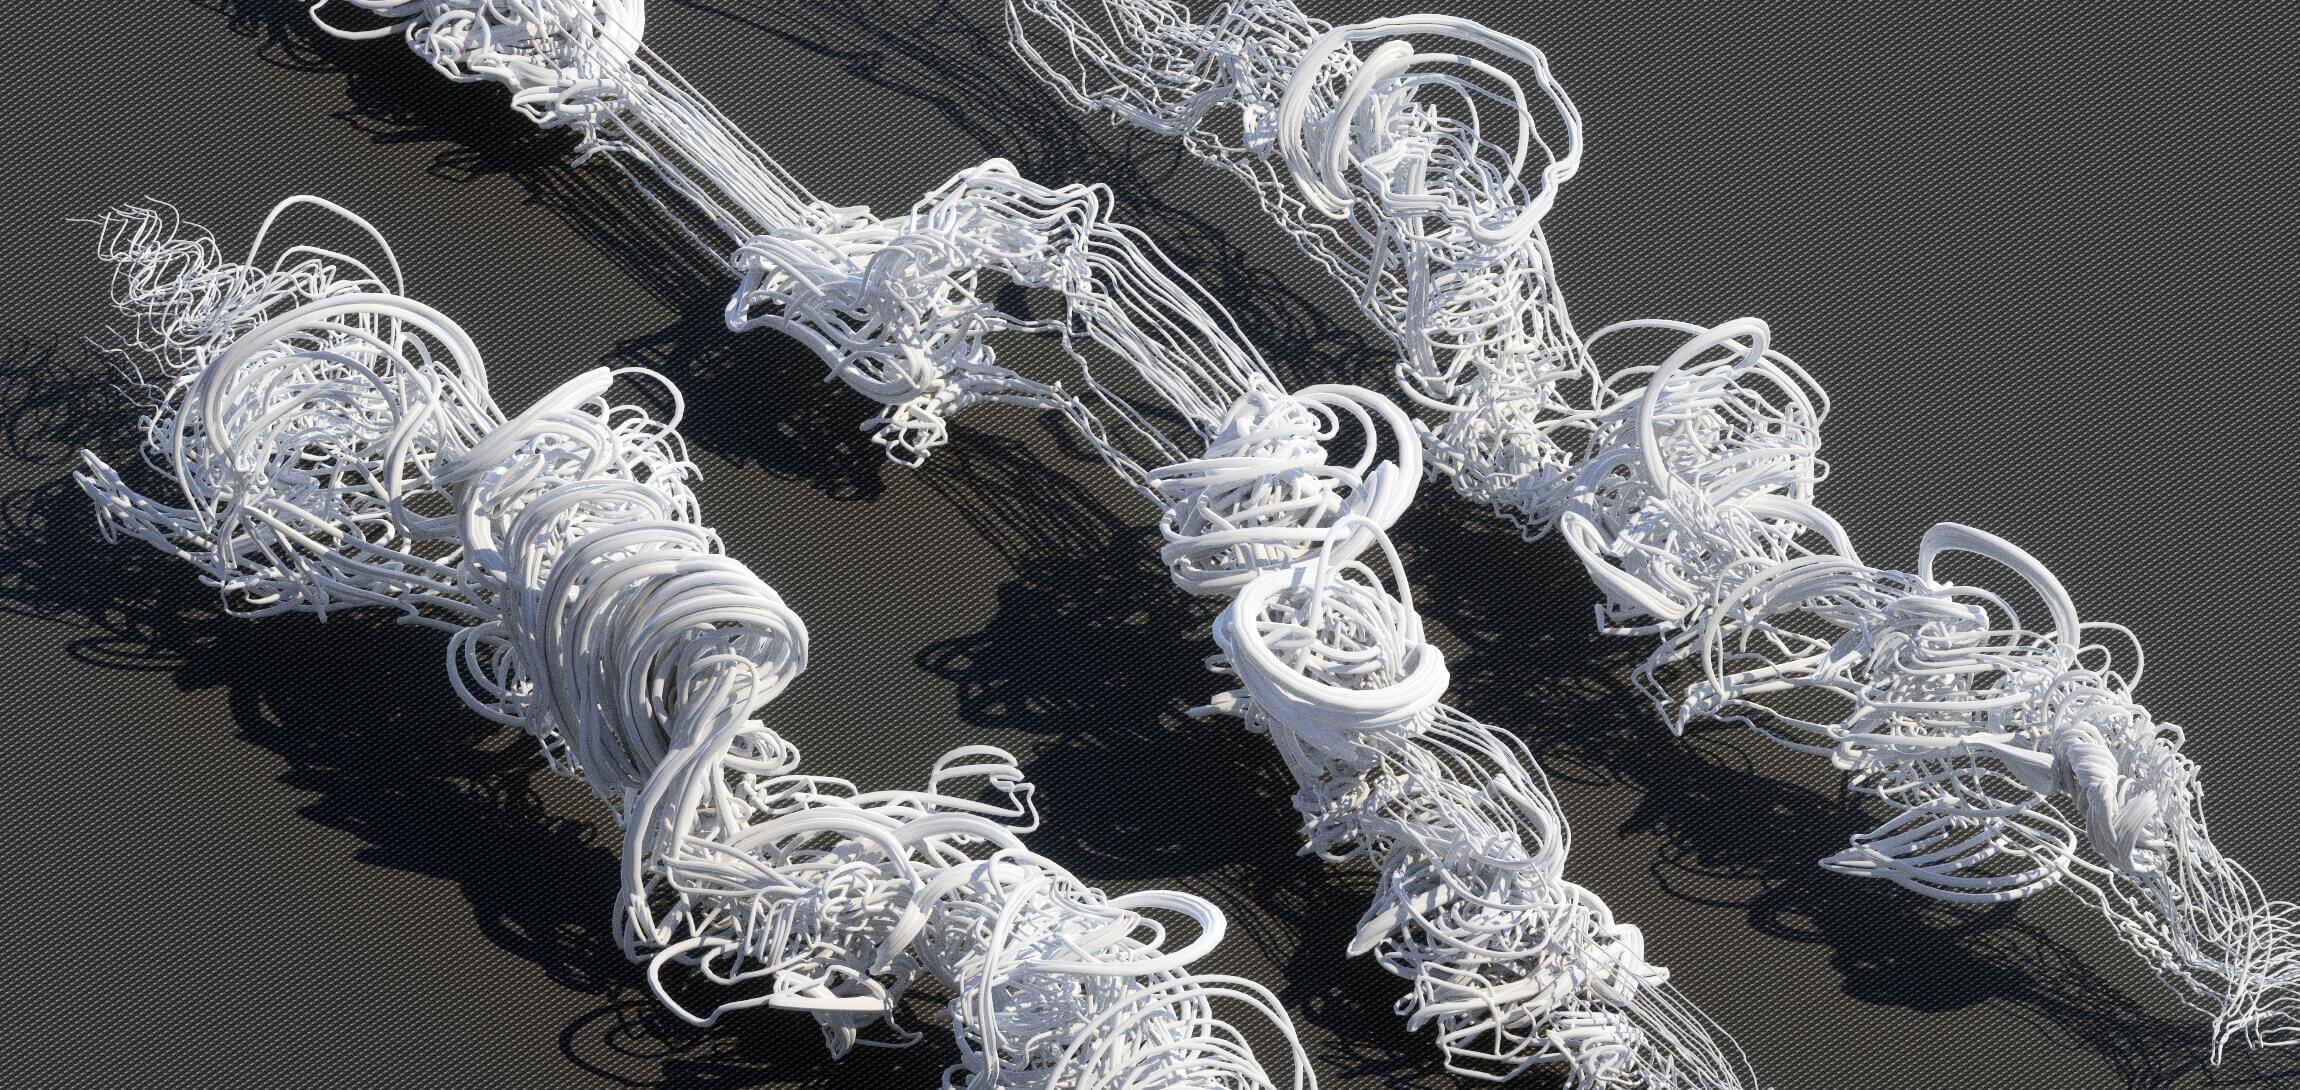 three renderings of dancers' movement in motion capture. 3 groups of twisted spaghetti like strands